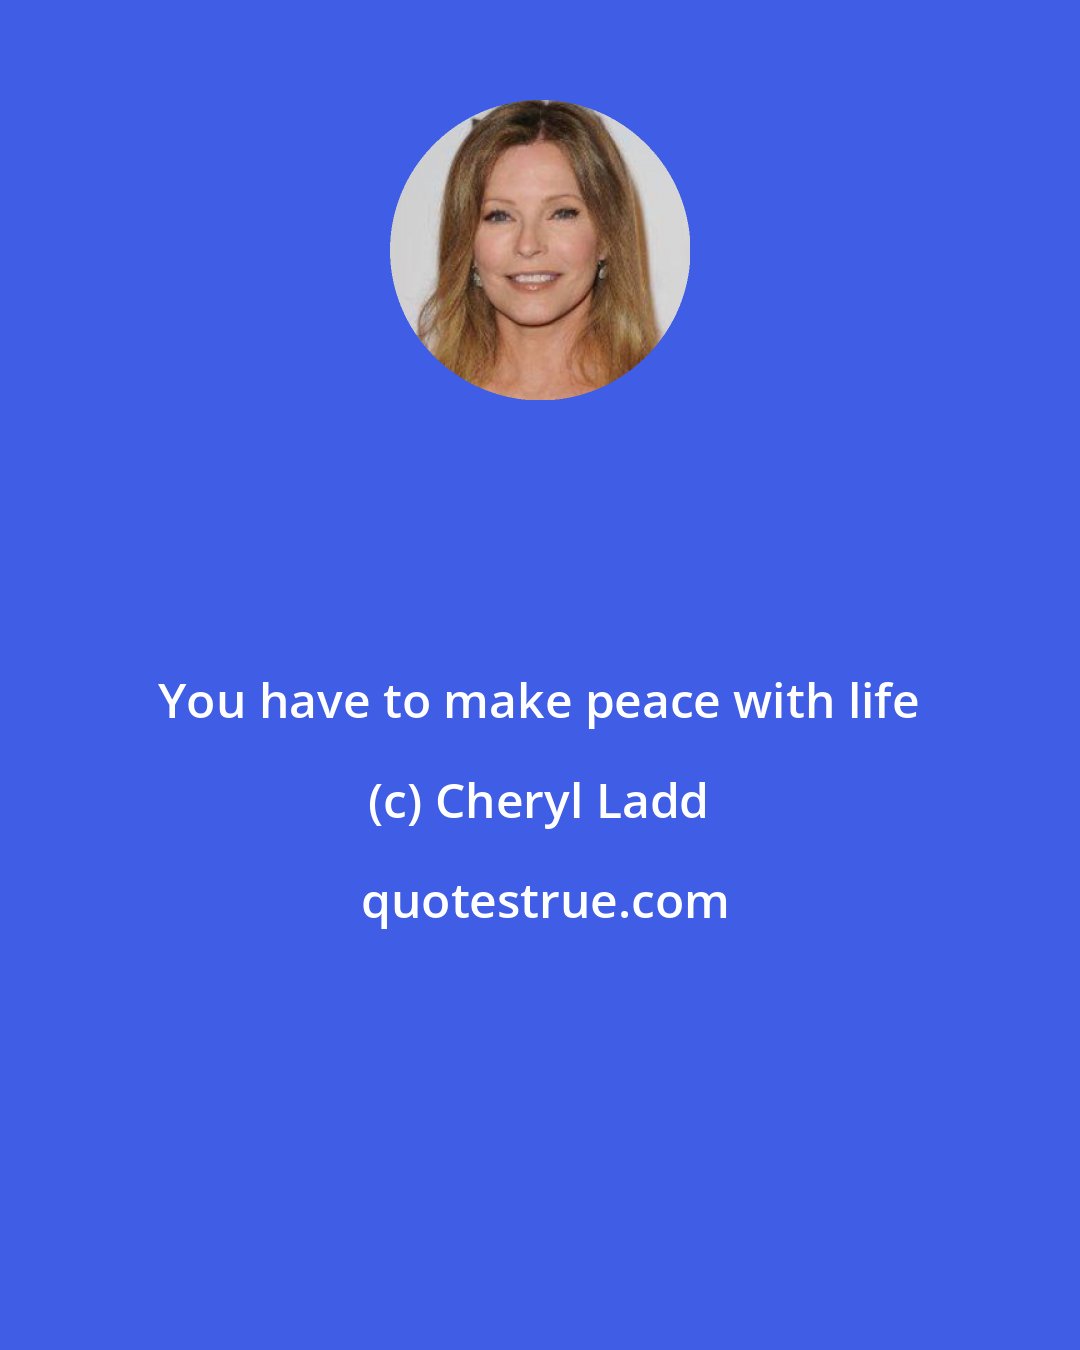 Cheryl Ladd: You have to make peace with life